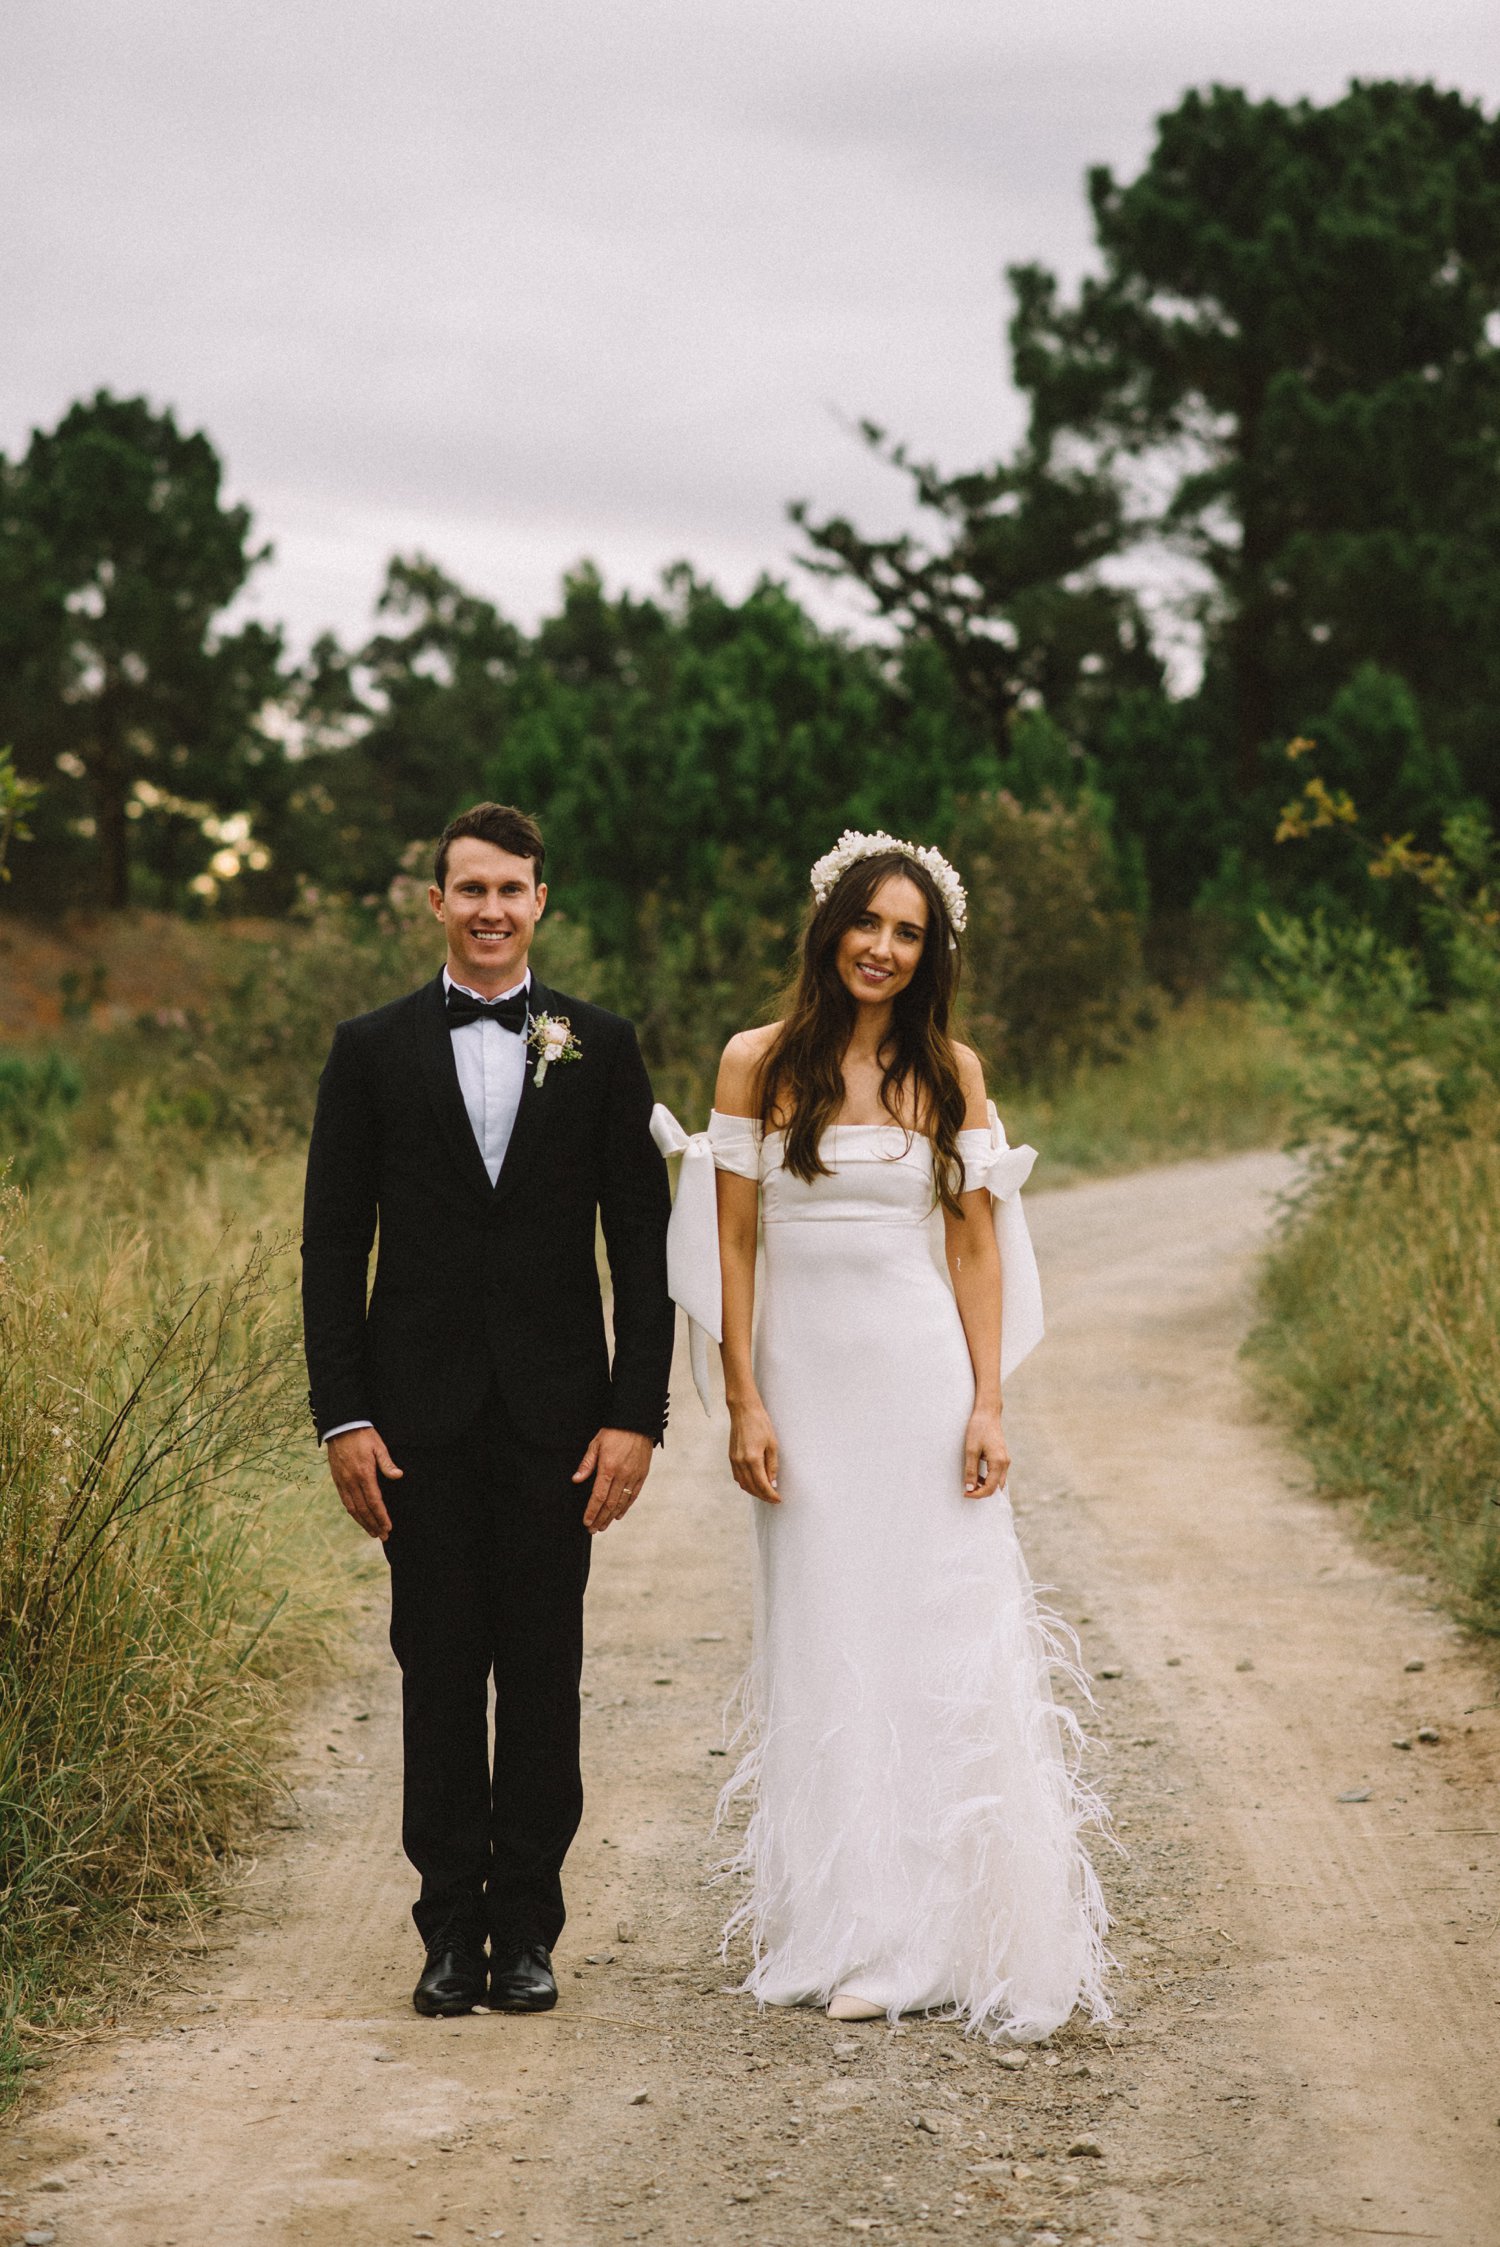 Classy Plettenberg Bay Wedding with Jason and Caileigh